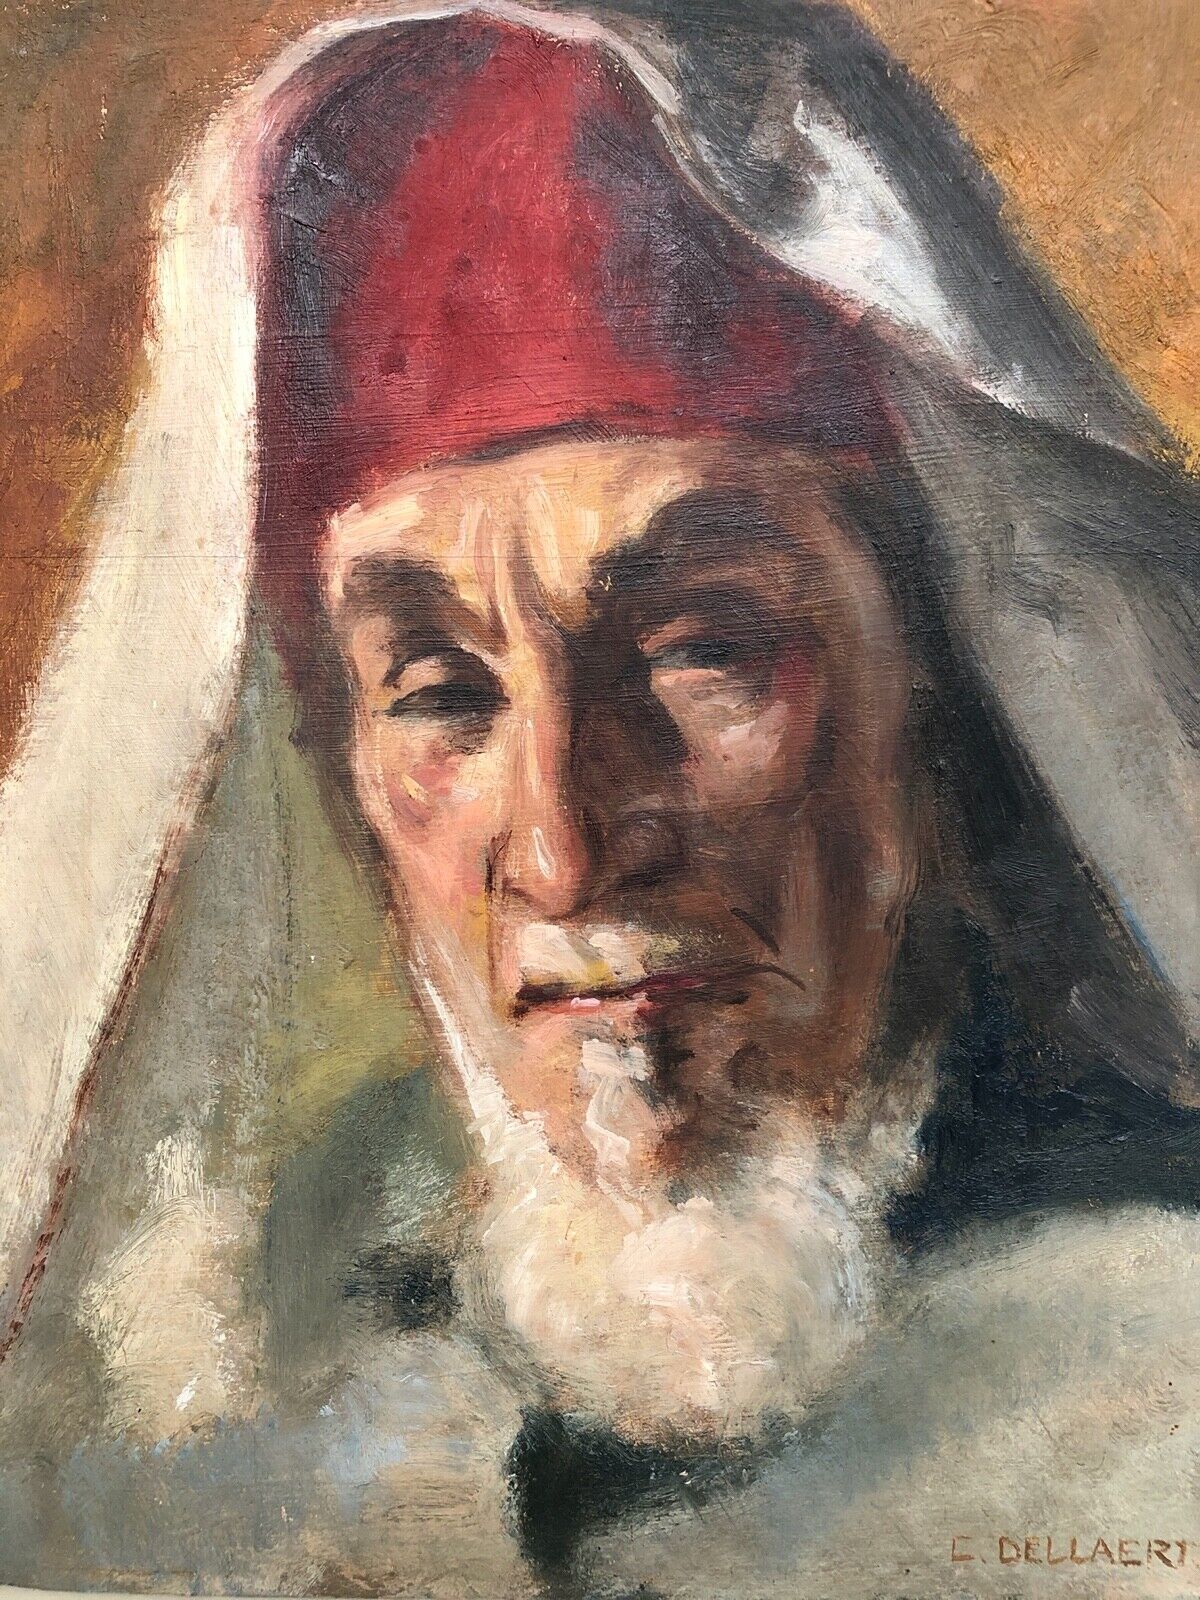 Stunning Oil painting of an Orthodox Priest - Signed